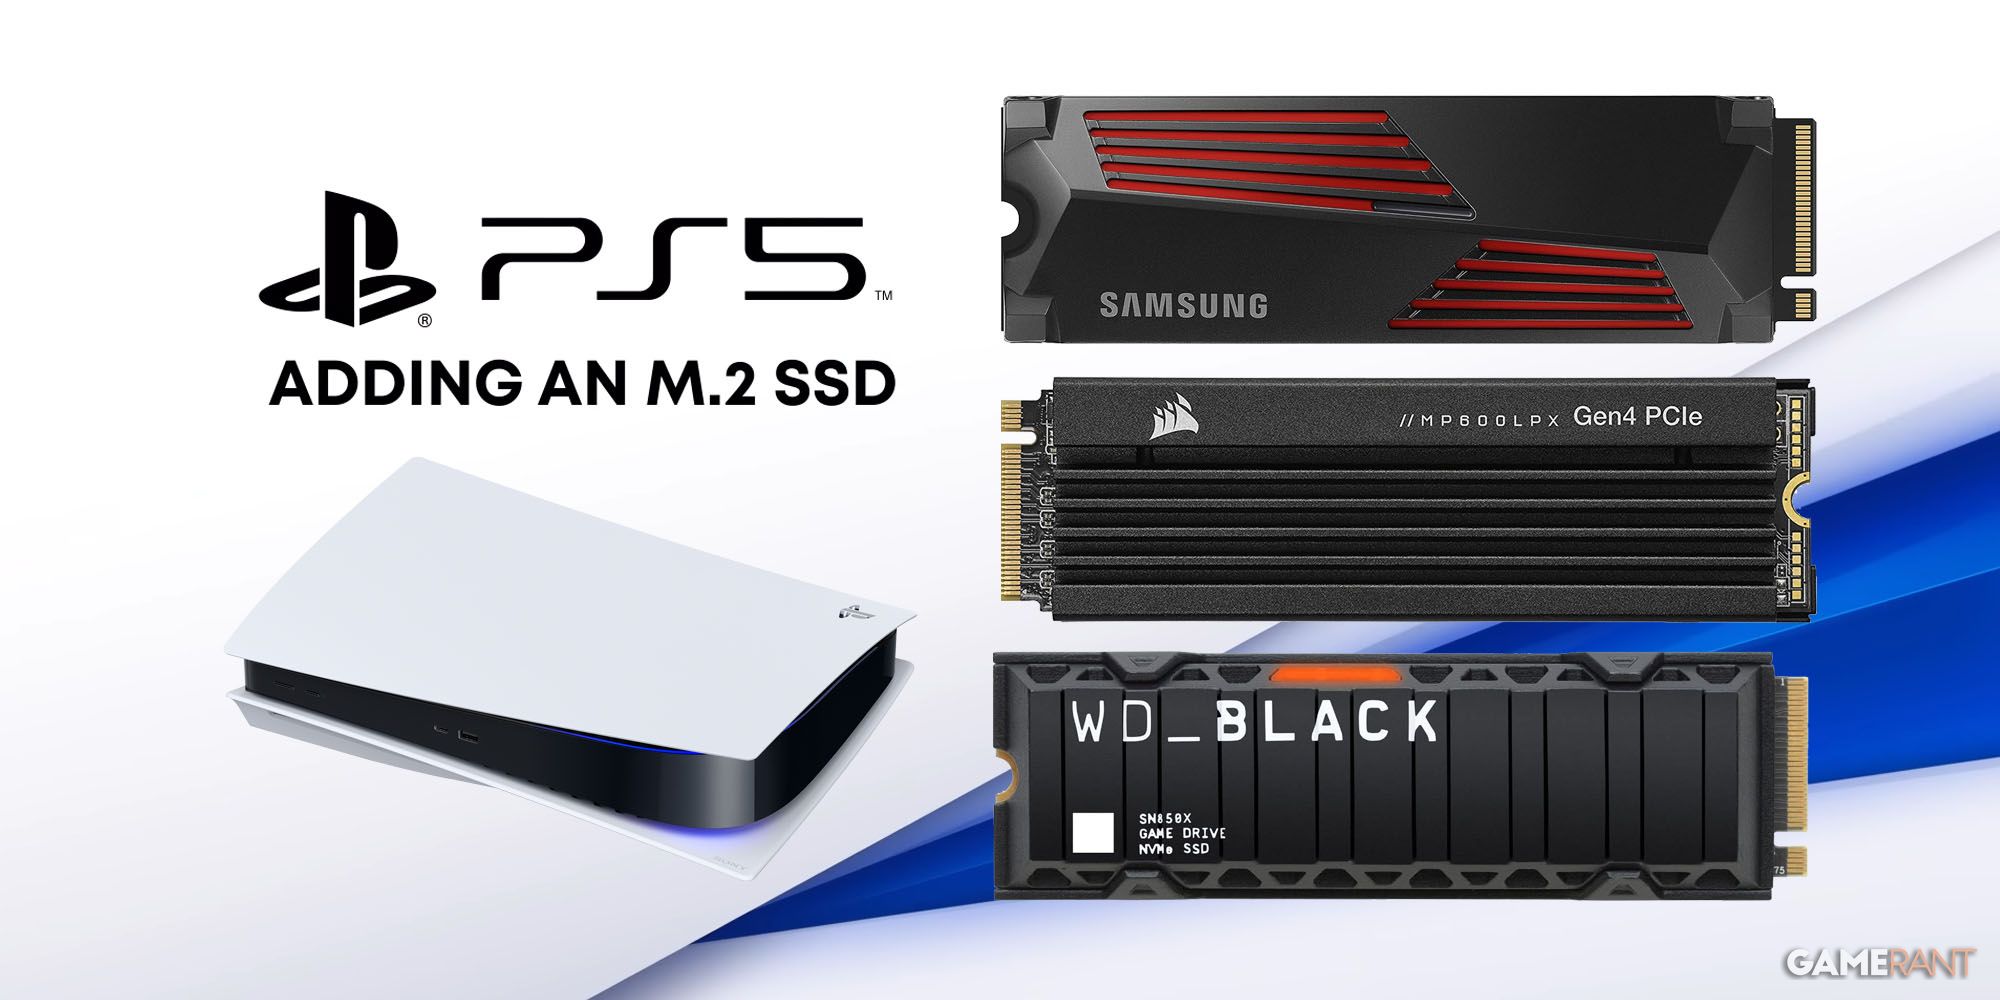 Game Drive M.2 SSD for PS5